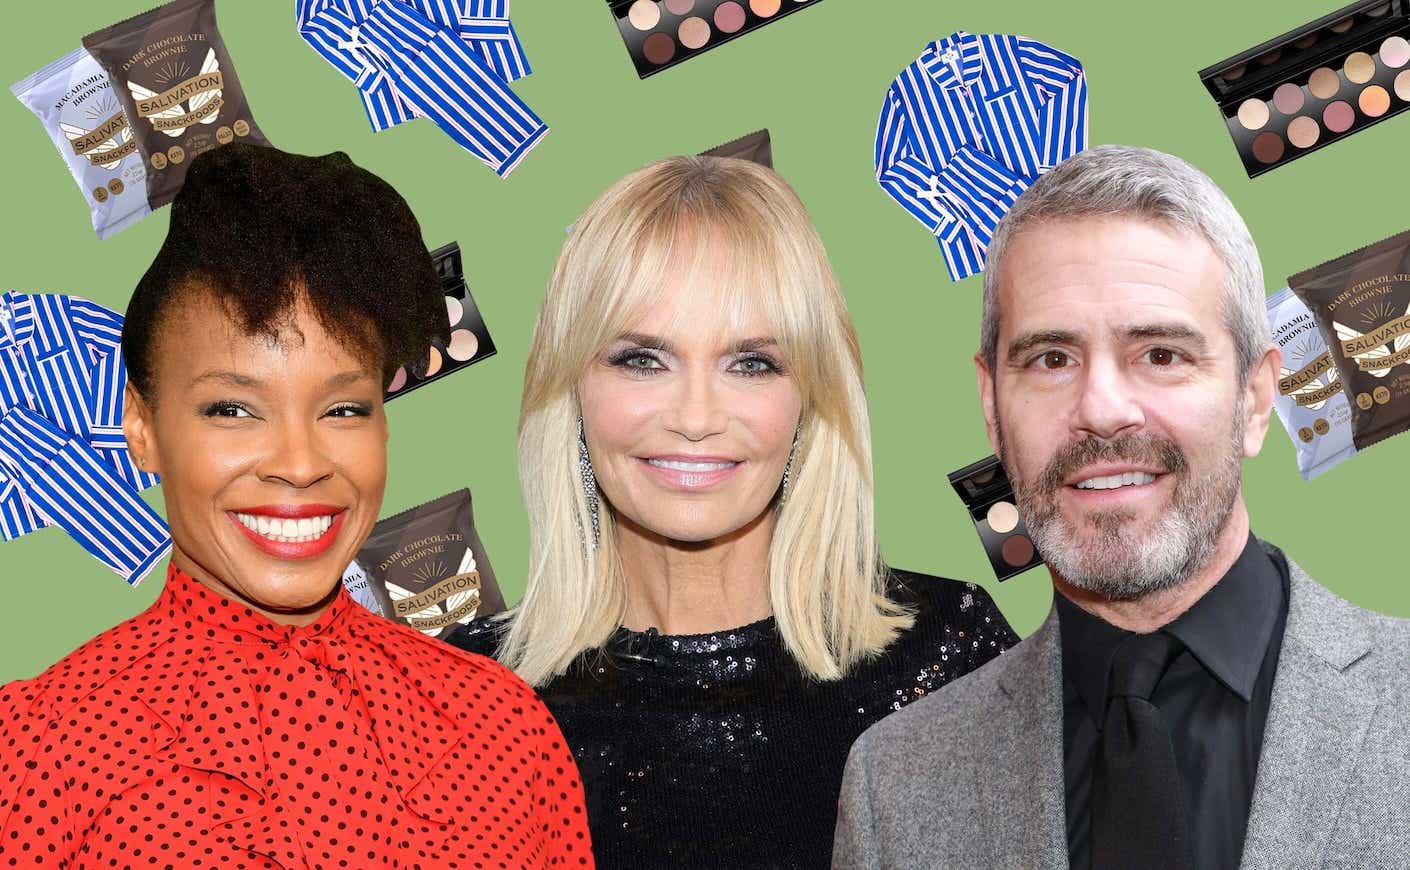 amber ruffin, kristen chenoweth, and andy cohen against a backdrop of gifts